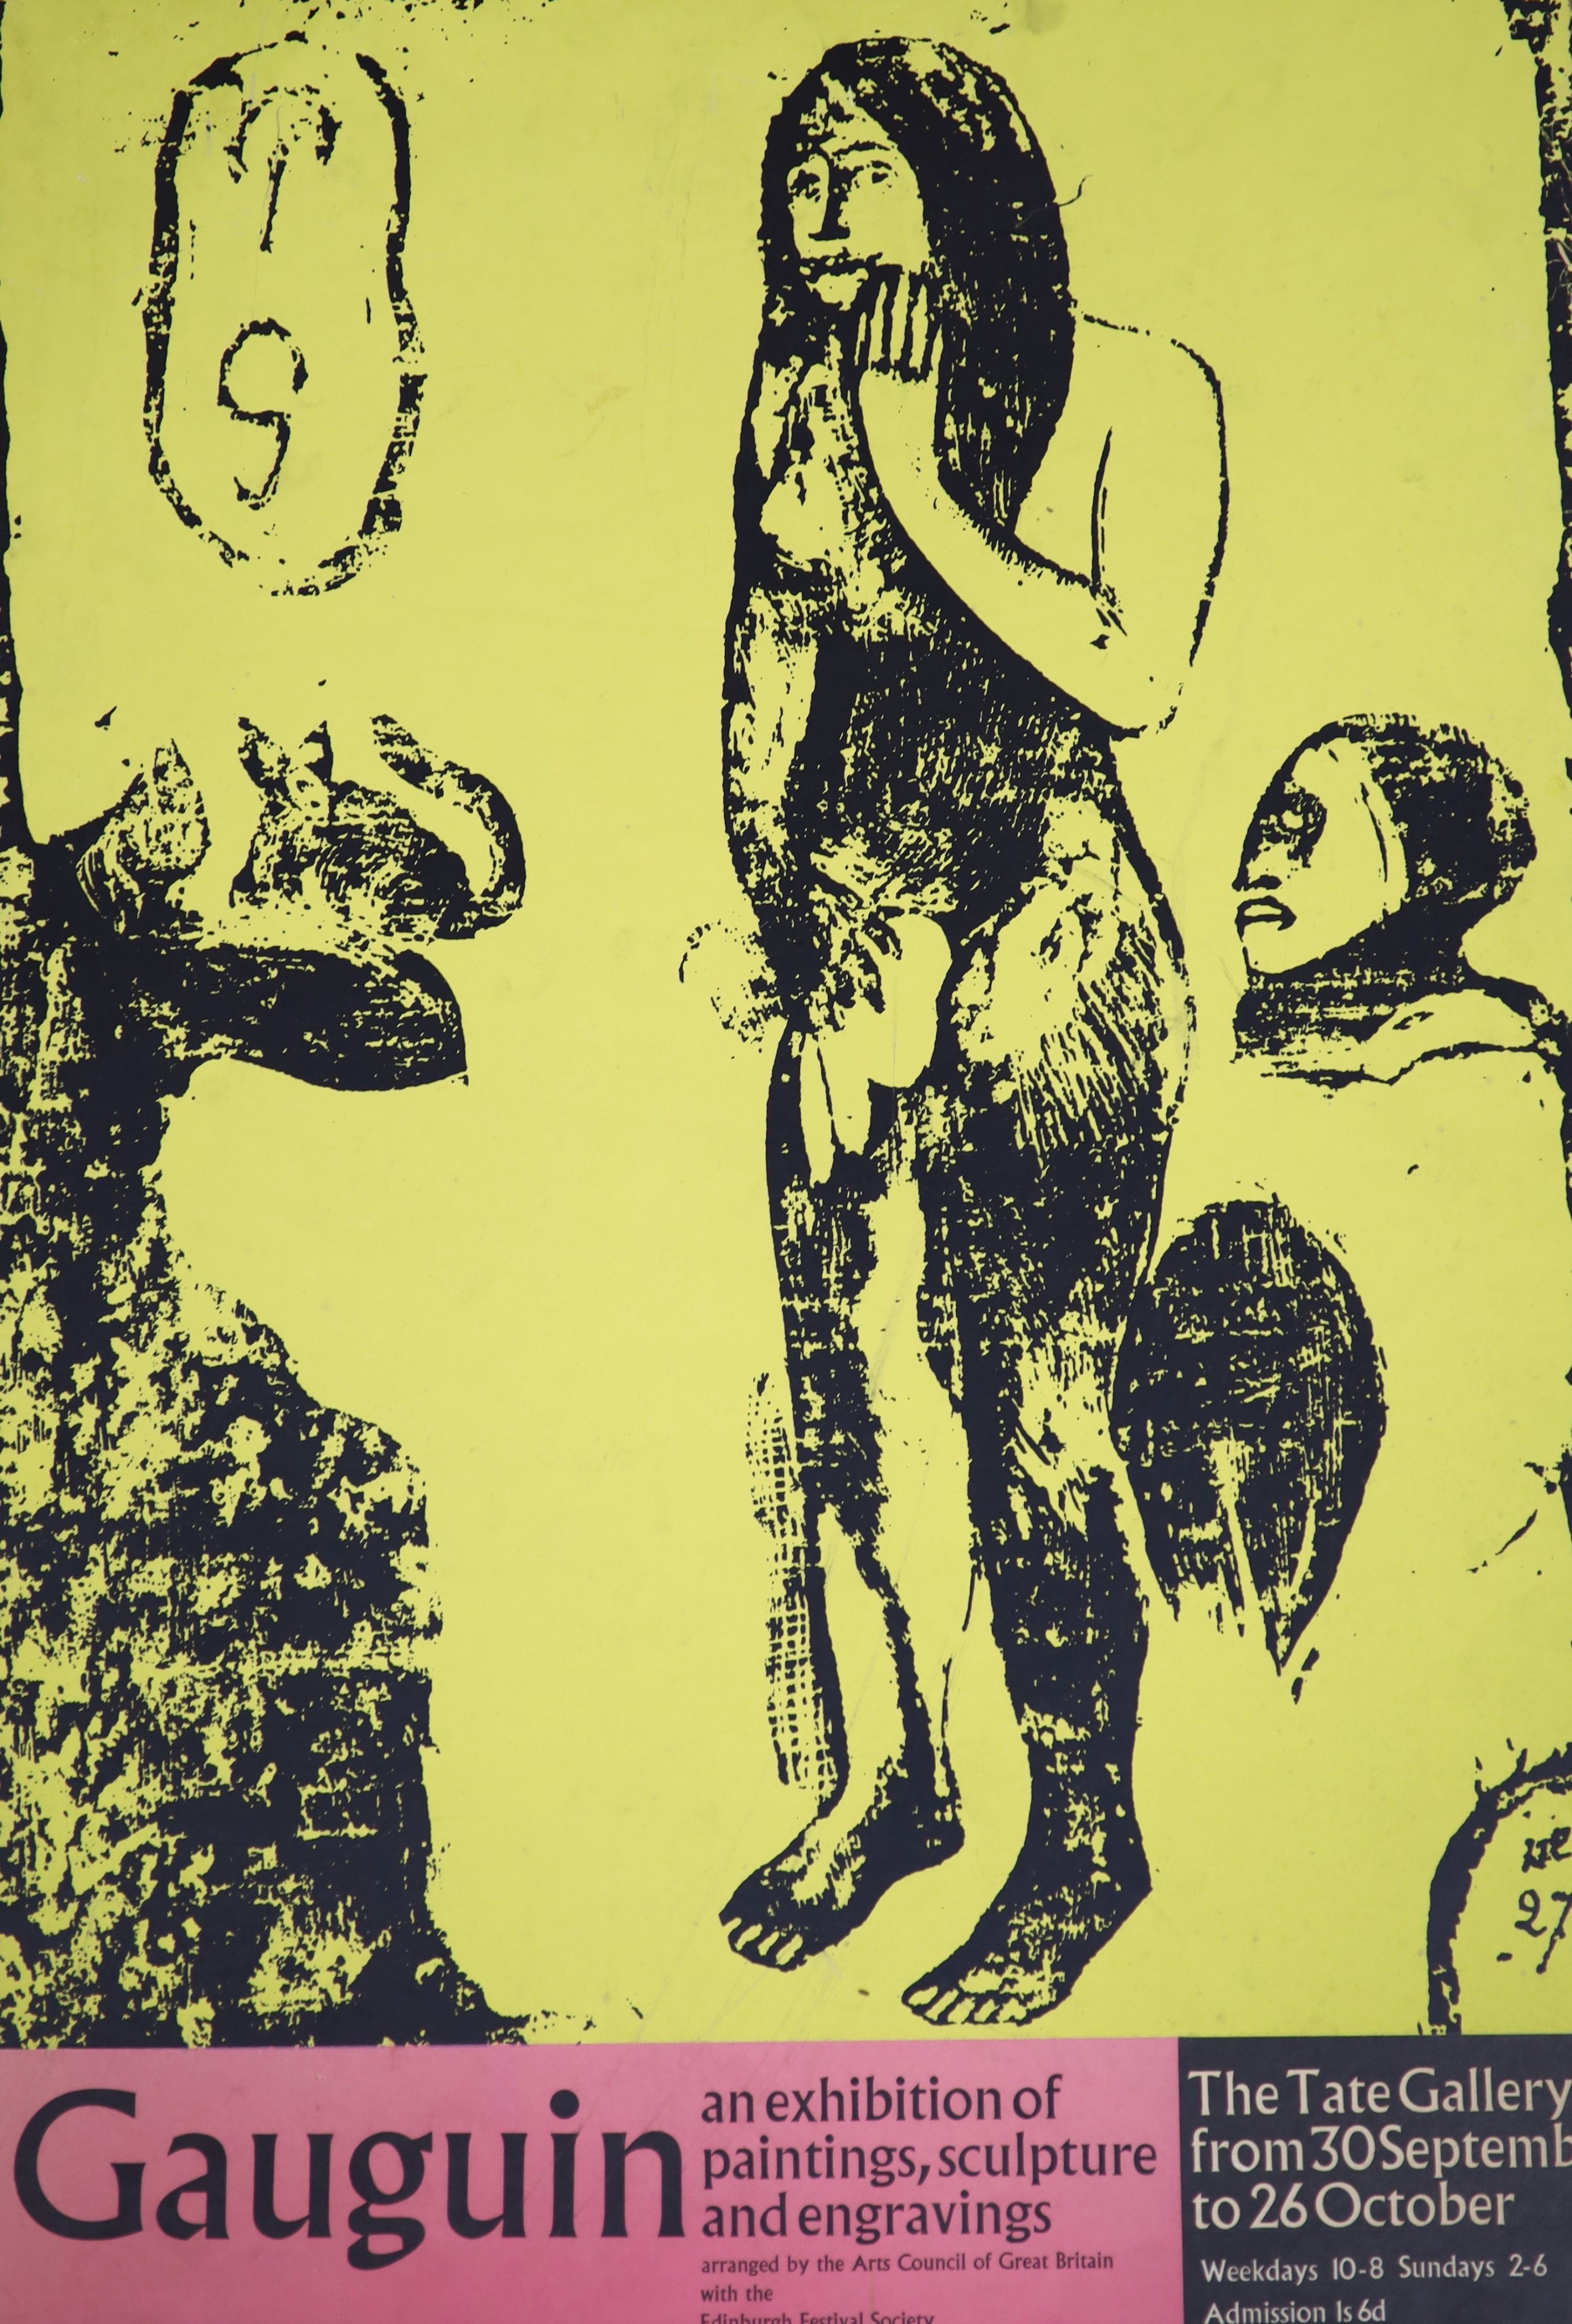 Three printed posters mounted on card for Exhibitions of Works by Gauguin, Odilon Redon and - Image 2 of 4